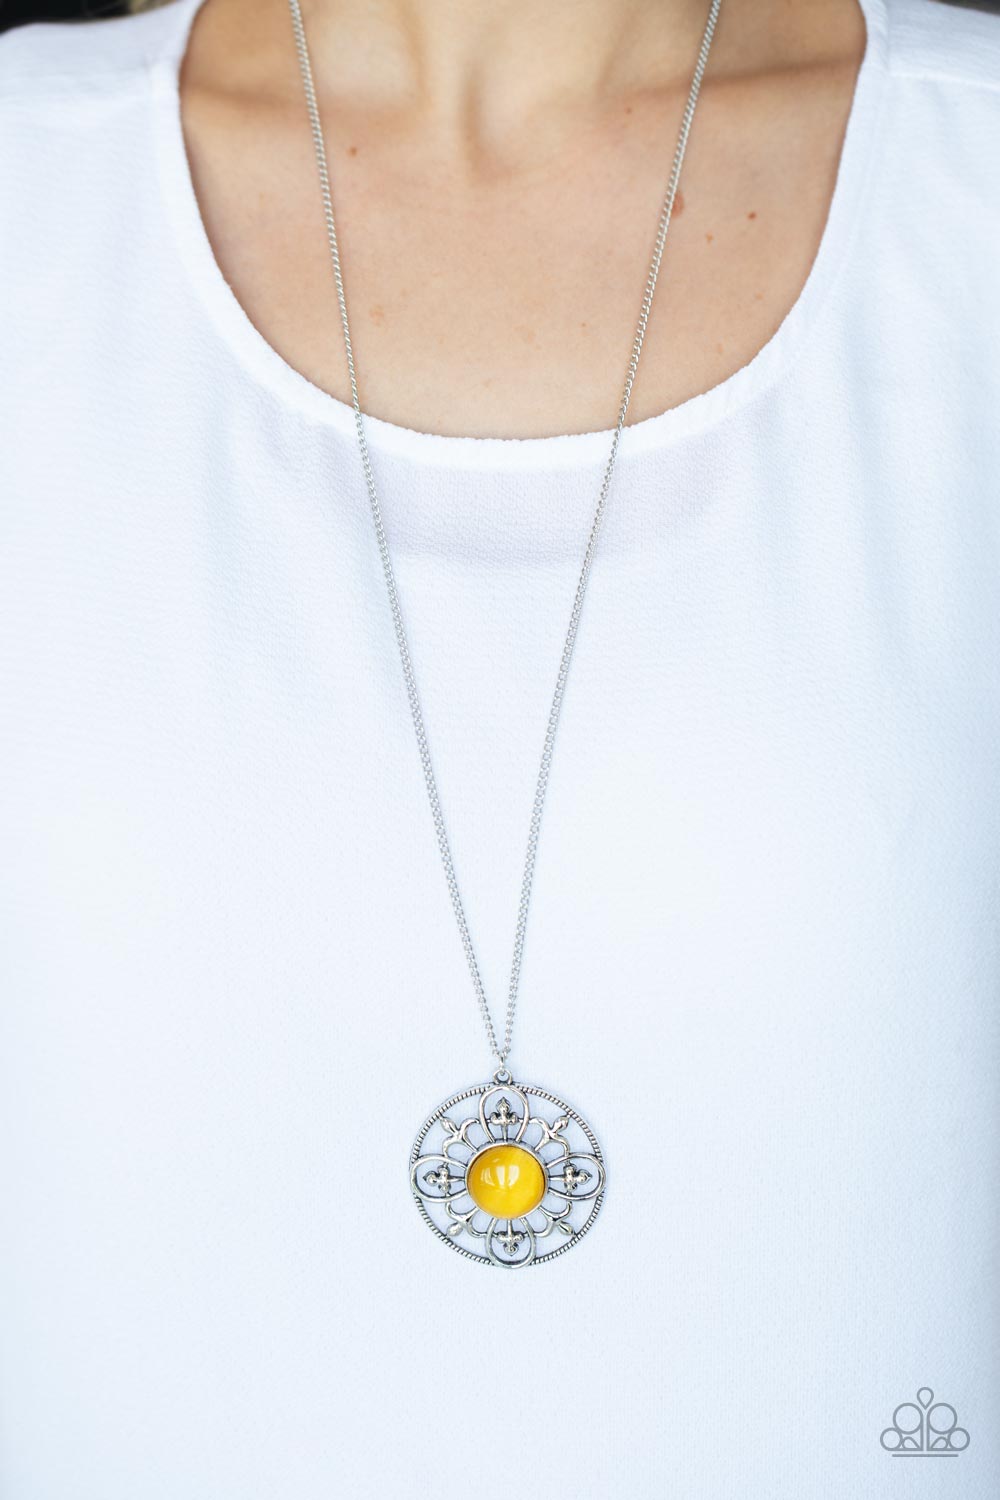 Celestial Compass Yellow Cat&#39;s Eye Stone Necklace - Paparazzi Accessories-on model - CarasShop.com - $5 Jewelry by Cara Jewels